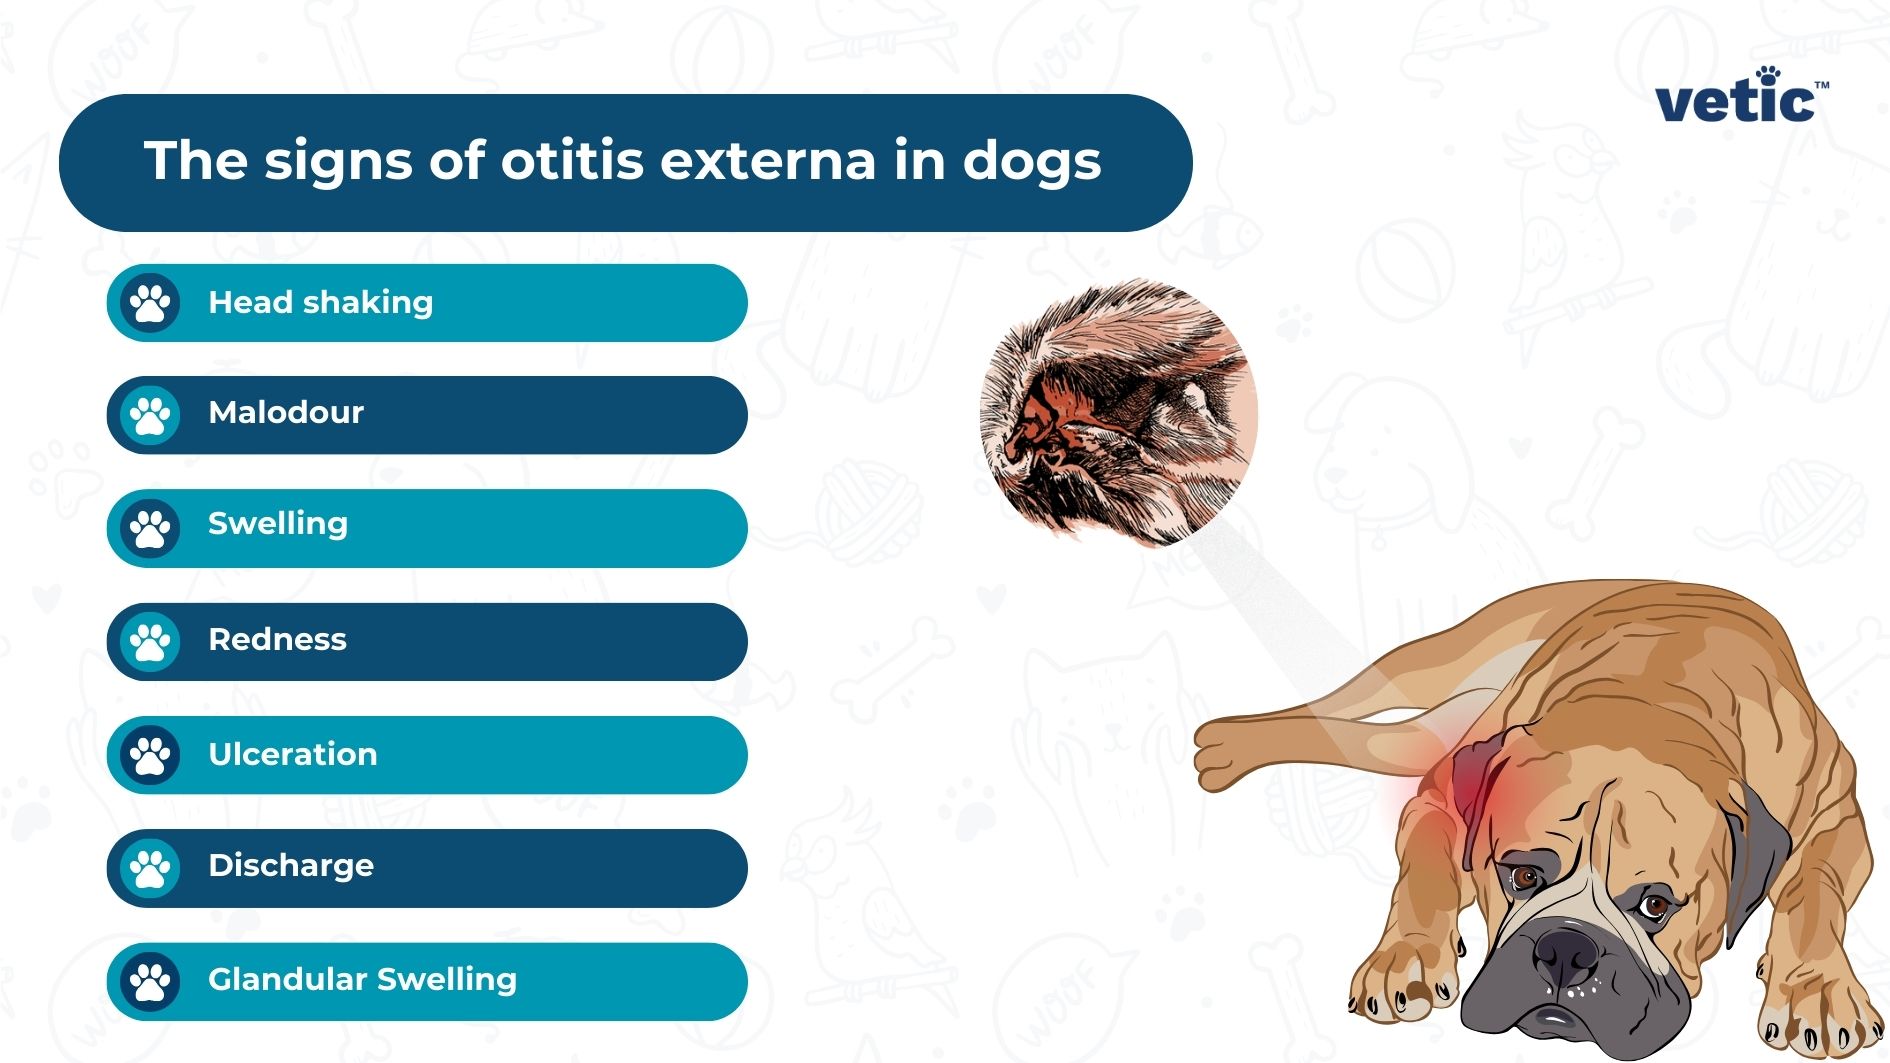 An informative image by vetic displaying the signs of otitis externa in dogs, including a list of symptoms like head shaking, malodour, swelling, ulceration, discharge and swelling and redness, accompanied by an illustration of a dog exhibiting discomfort and a close-up of an affected ear.